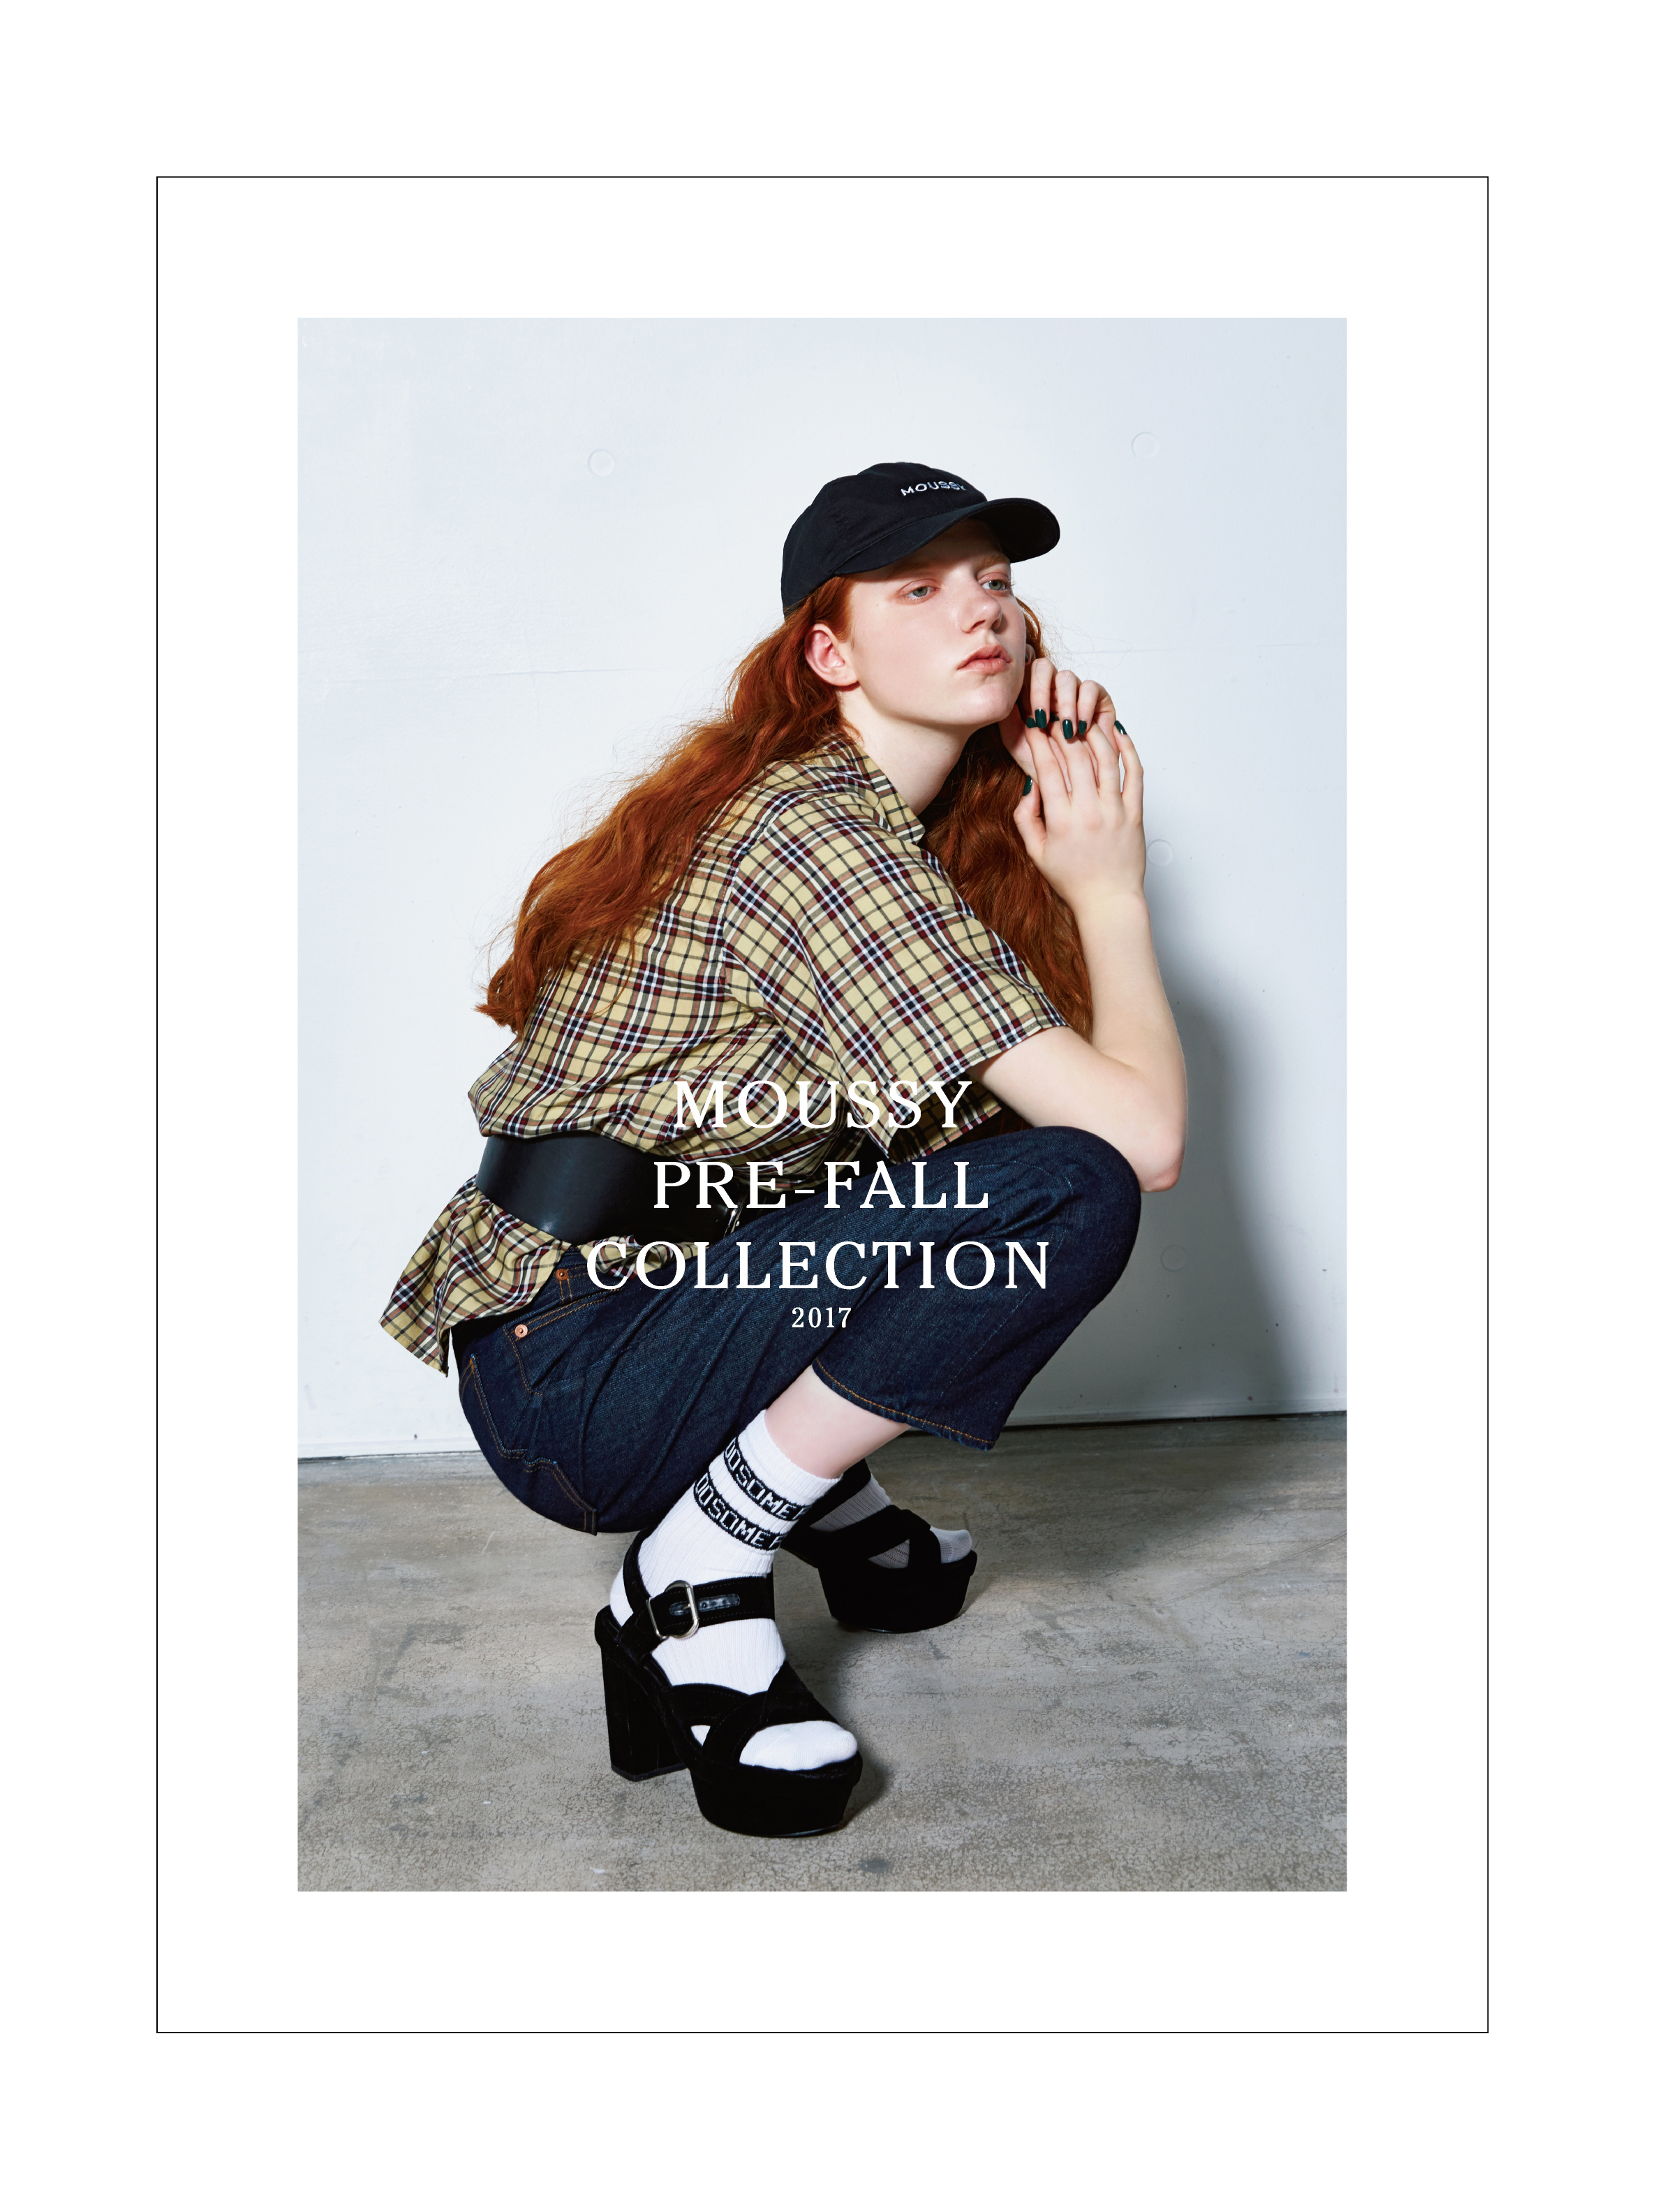 #MOUSSY Pre-fall Collection 2017 入荷リクエスト受付開始 